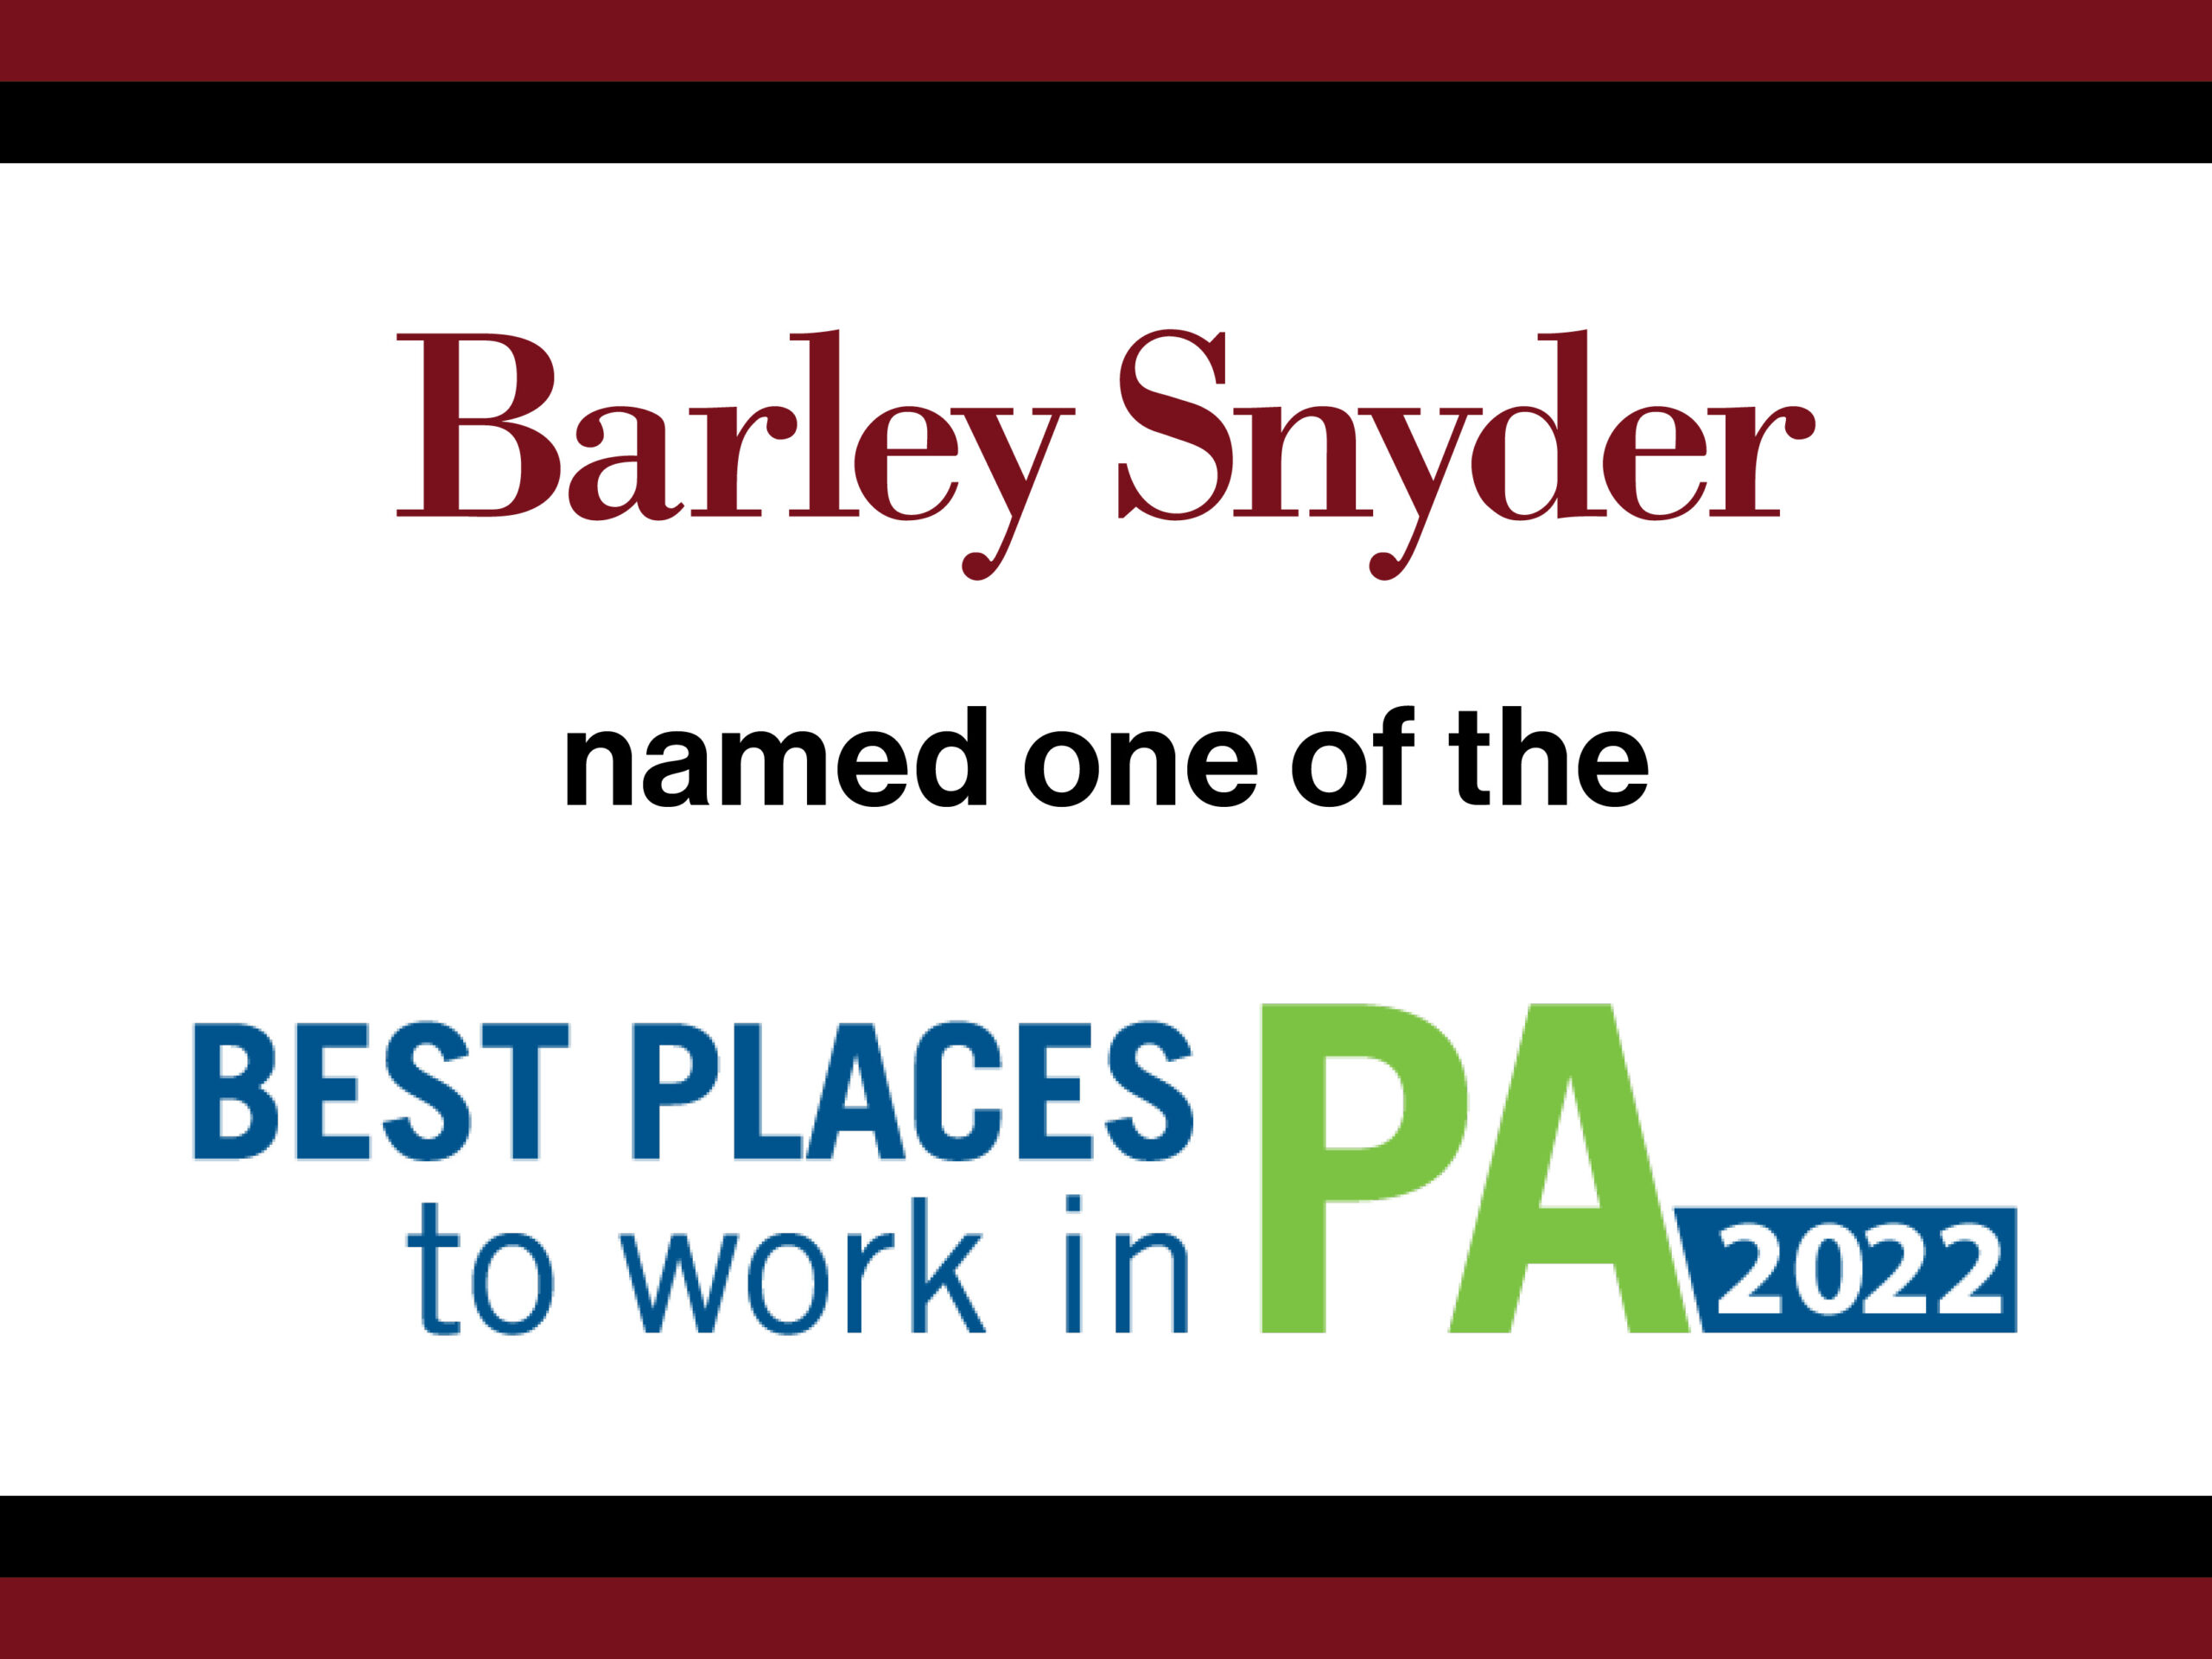 Barley named one of the best places to work